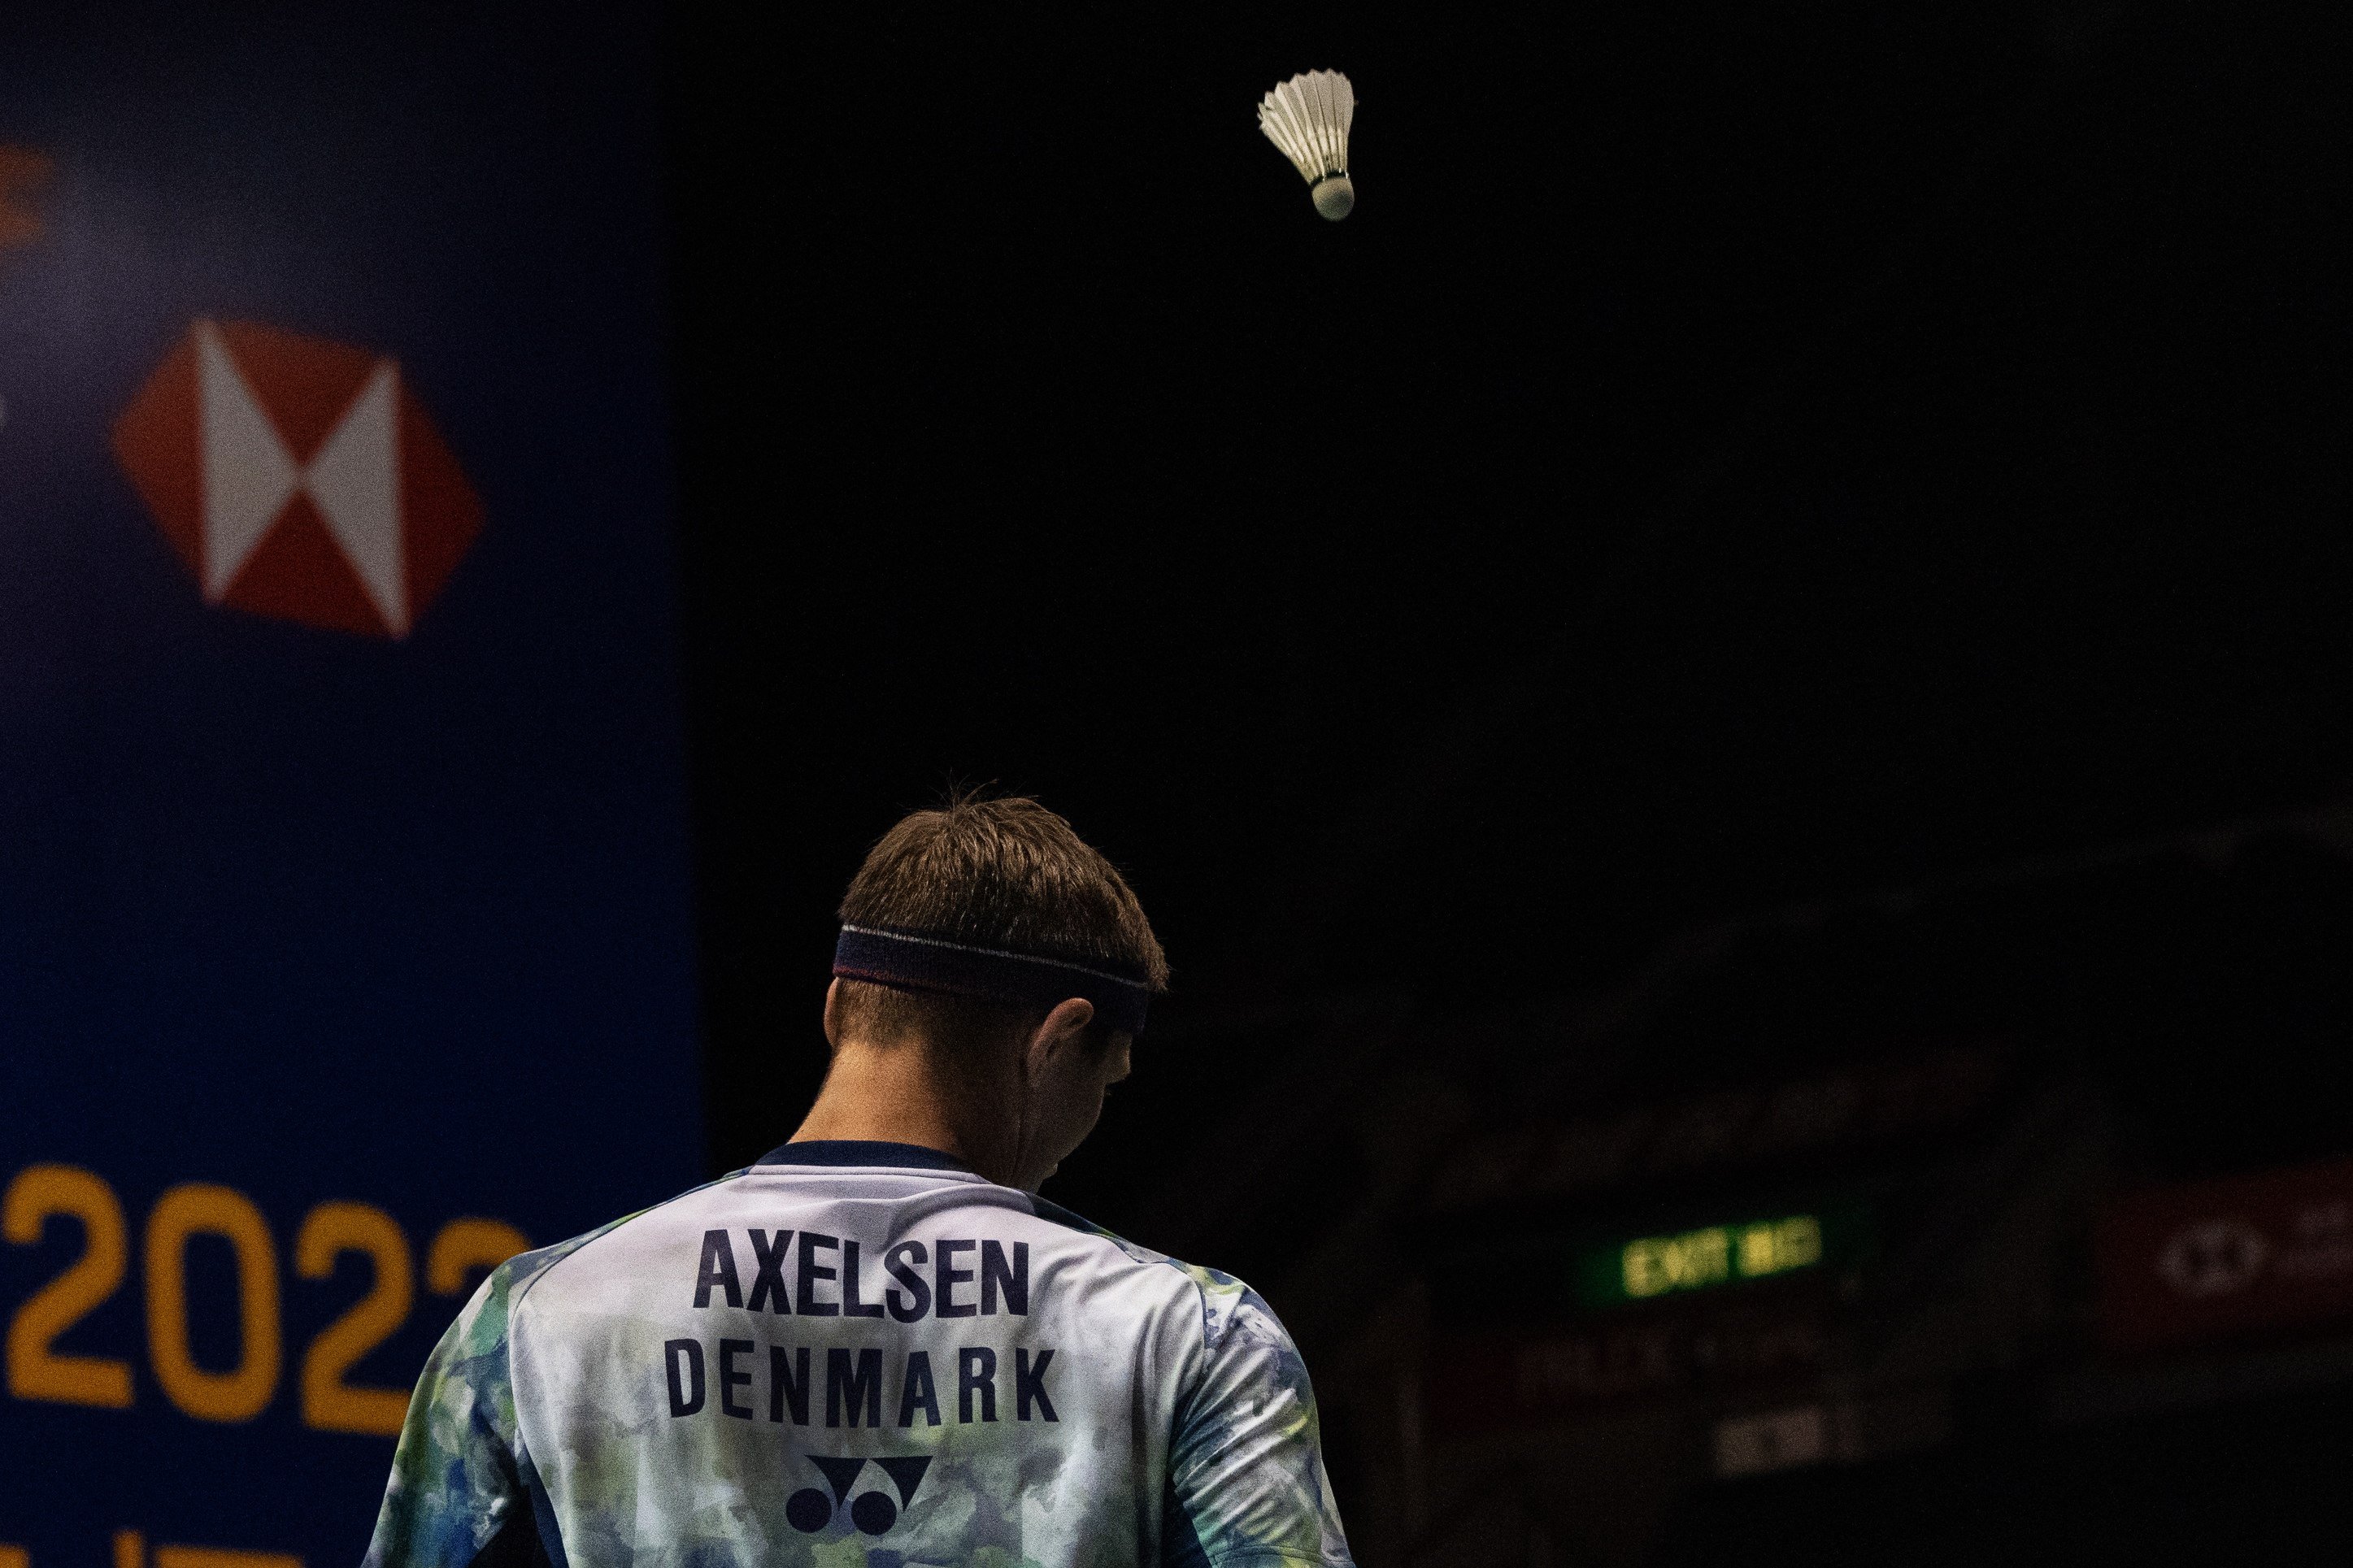 Viktor Axelsen of Denmark reacts during his men’s singles first round match match against Taiwan’s Lee Chia-Hao at the Victor Hong Kong Open. Photo: BERTHA WANG